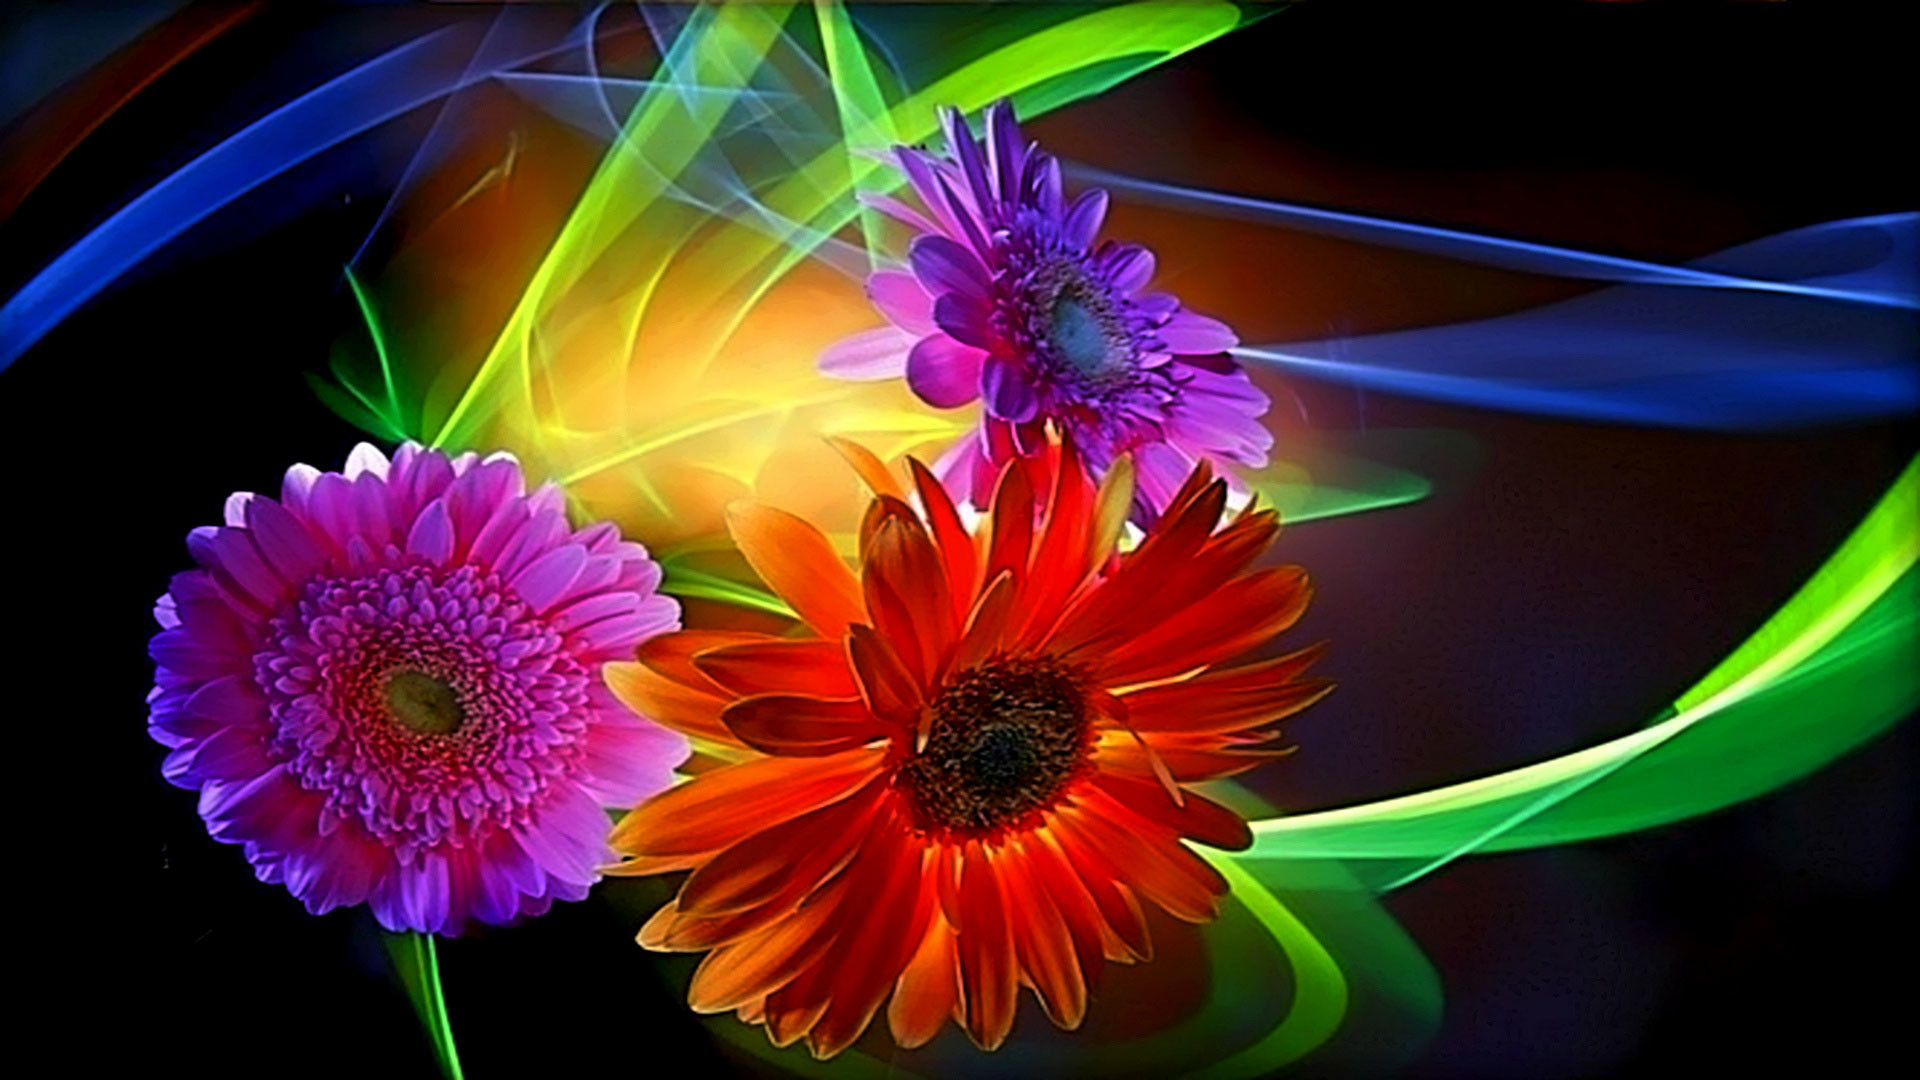 1920x1080 hd pics photos 3d colorful abstract flowers hd quality desktop background  wallpaper